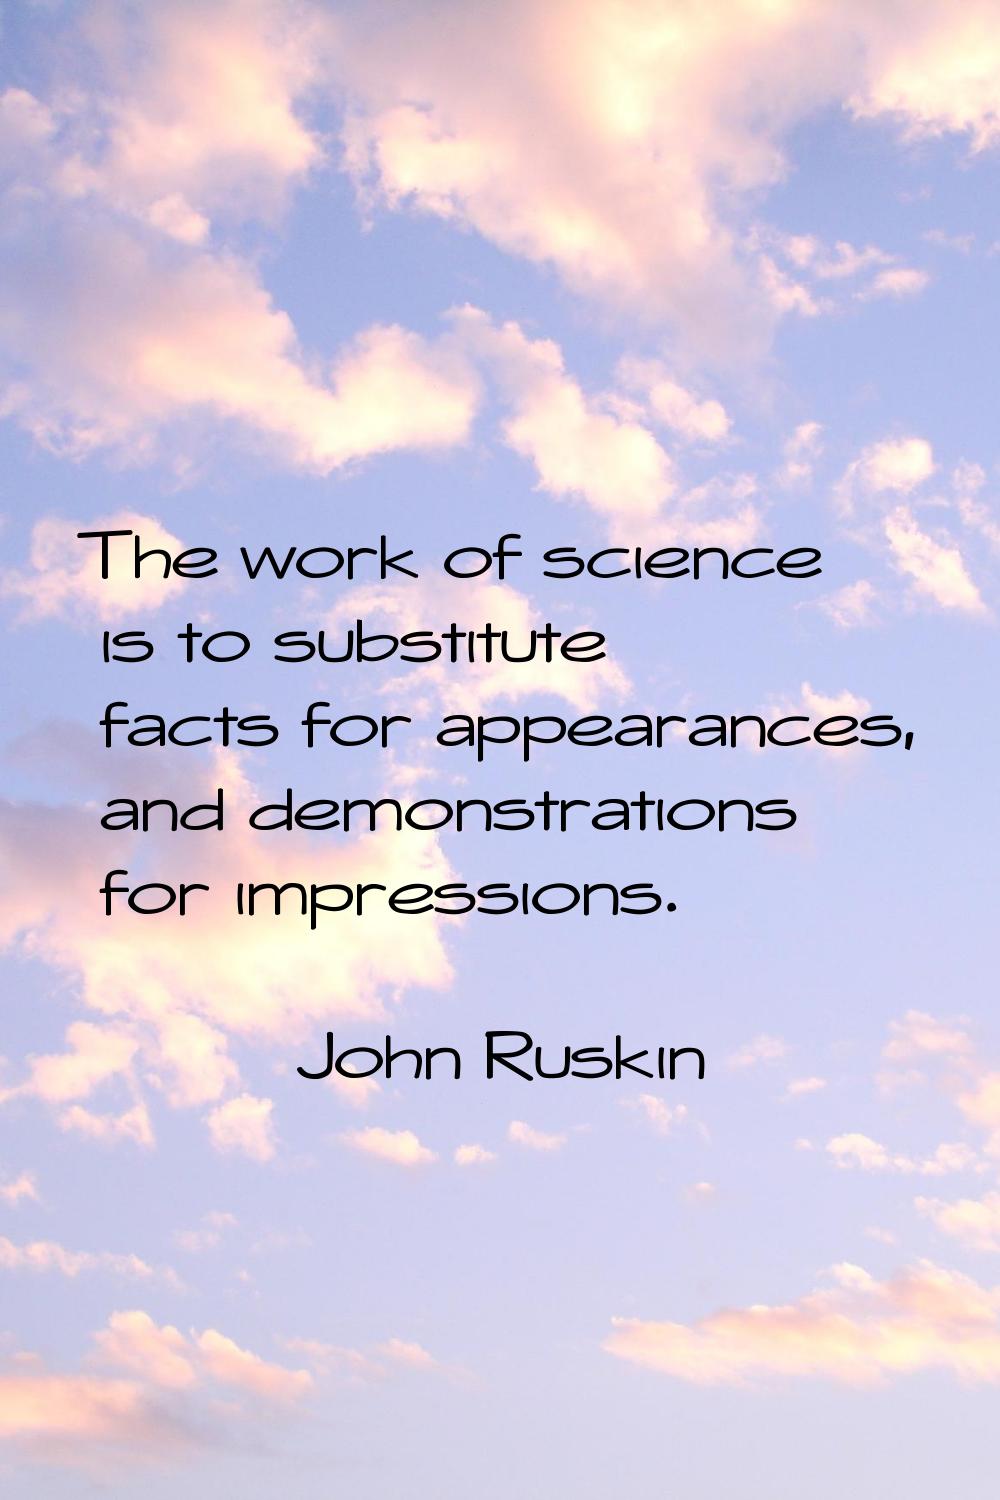 The work of science is to substitute facts for appearances, and demonstrations for impressions.